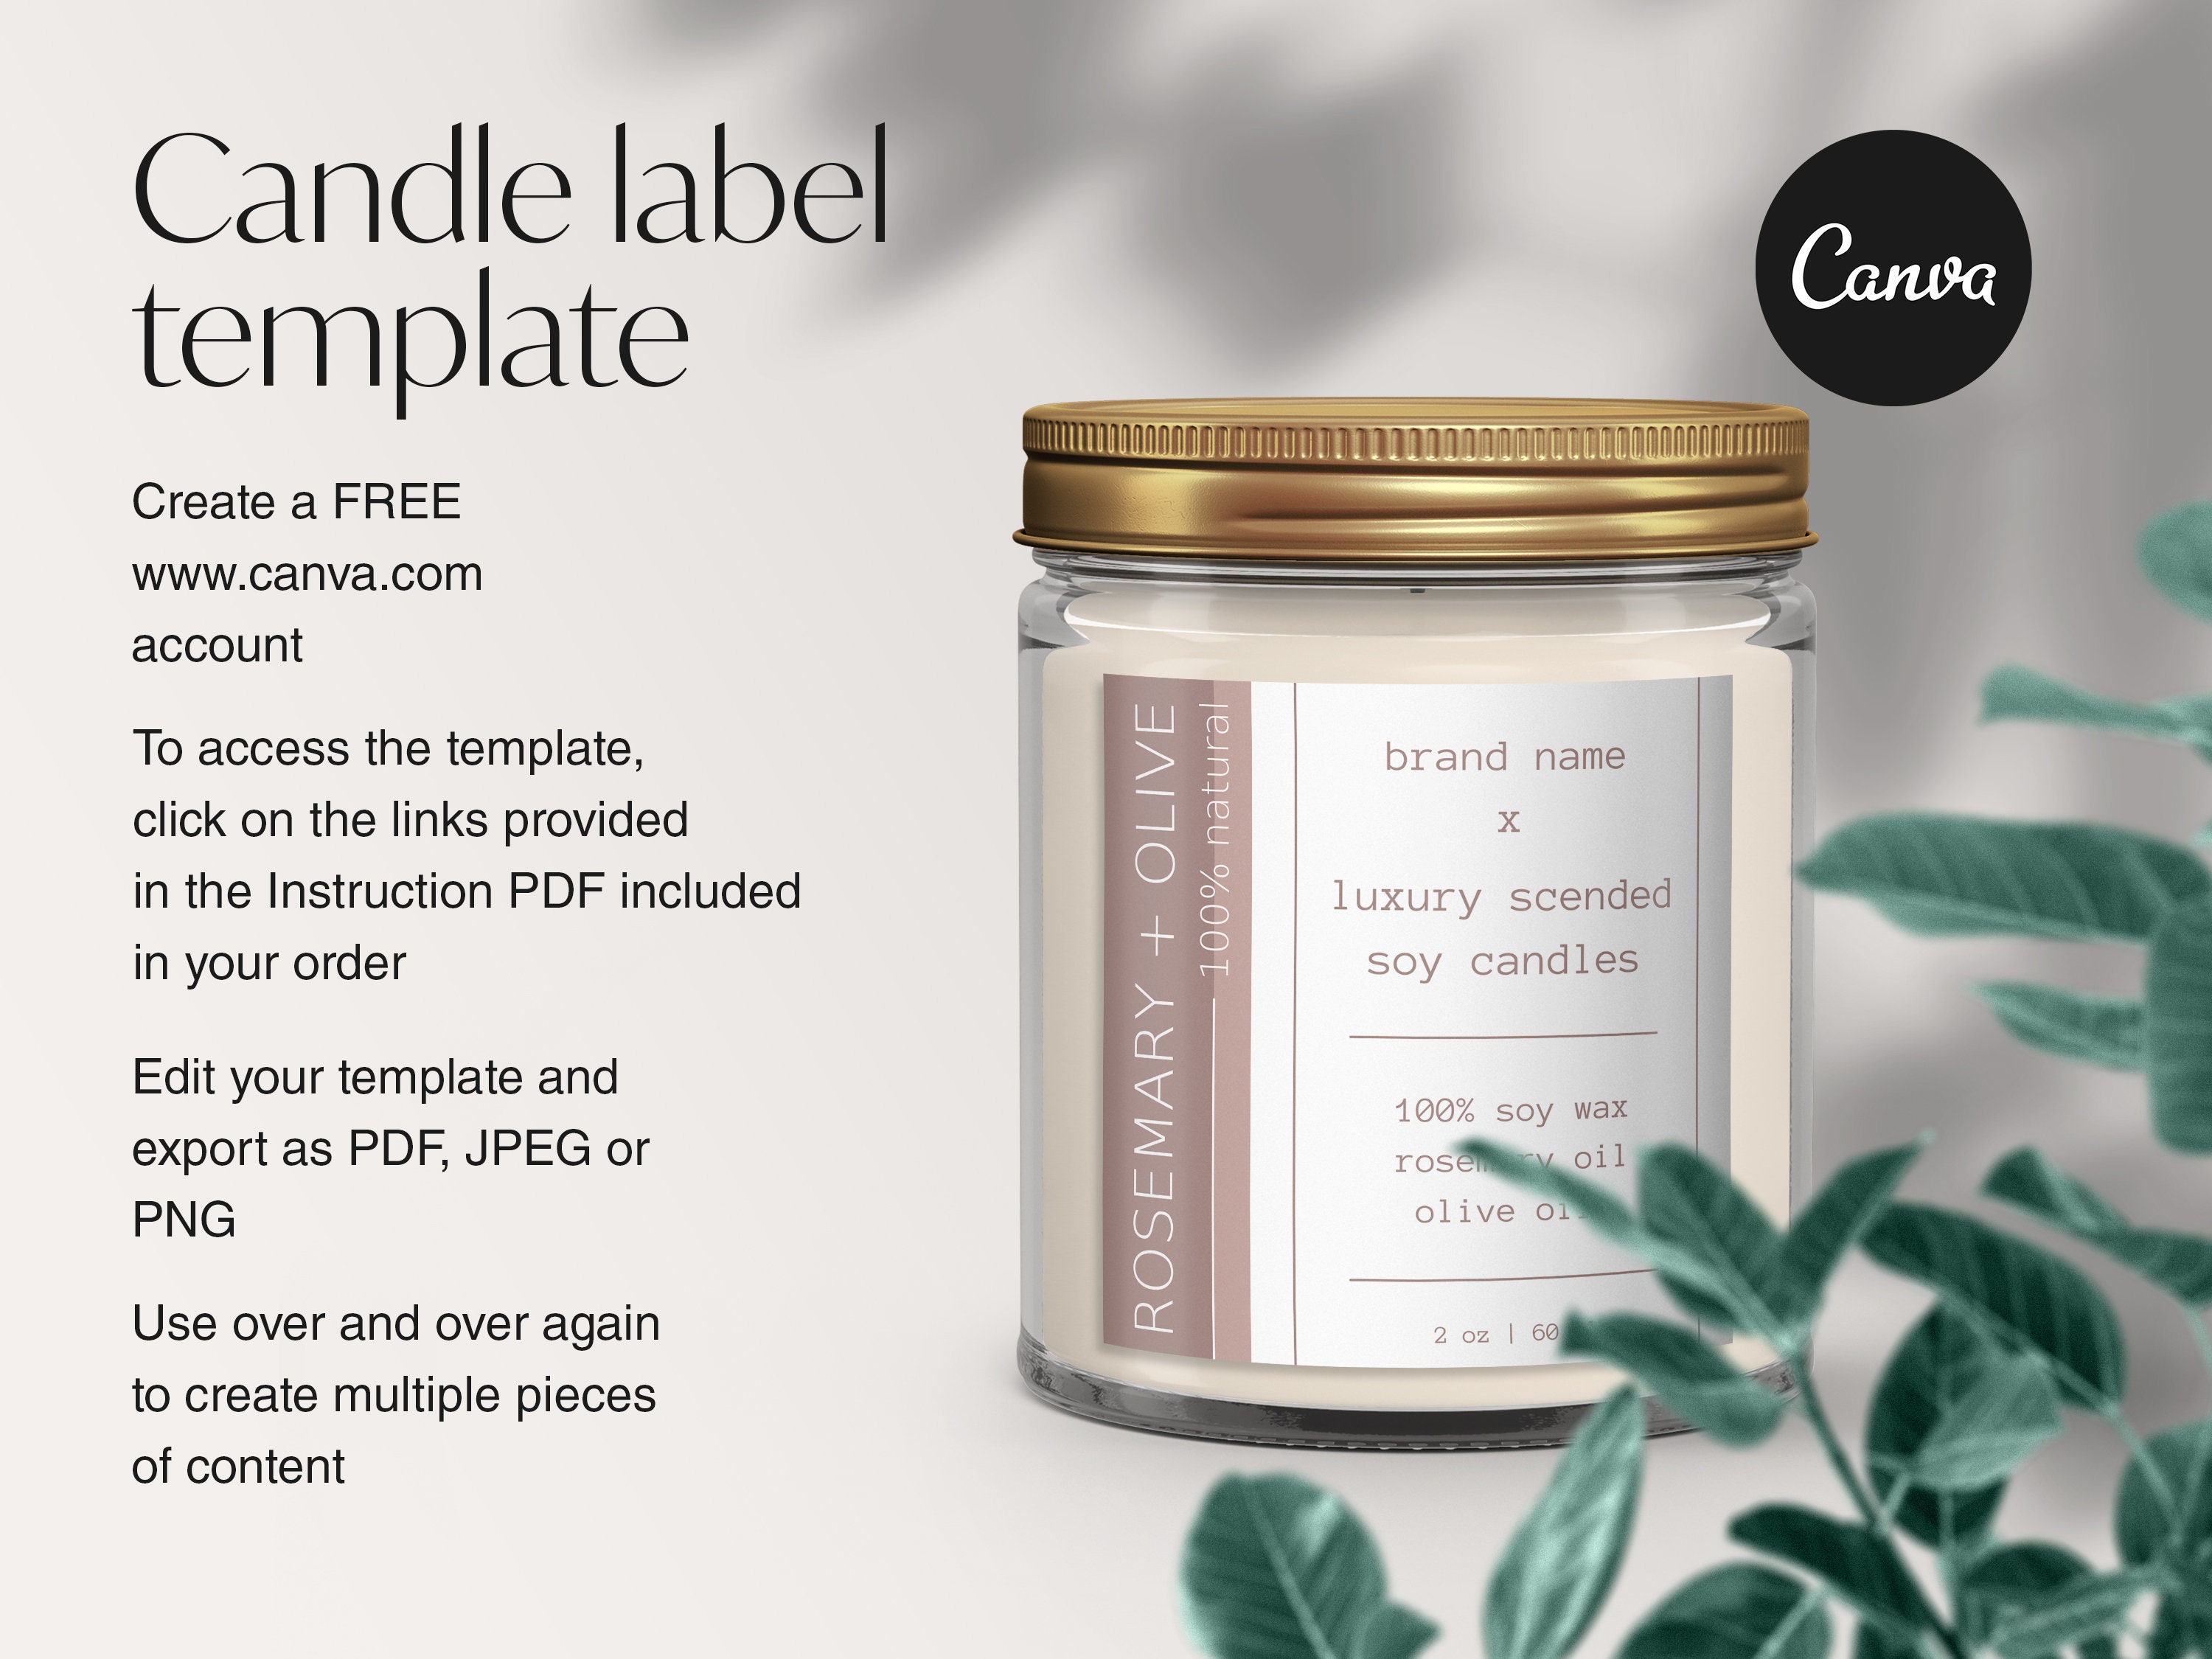 candle-label-template-canva-templates-diy-editable-candle-etsy